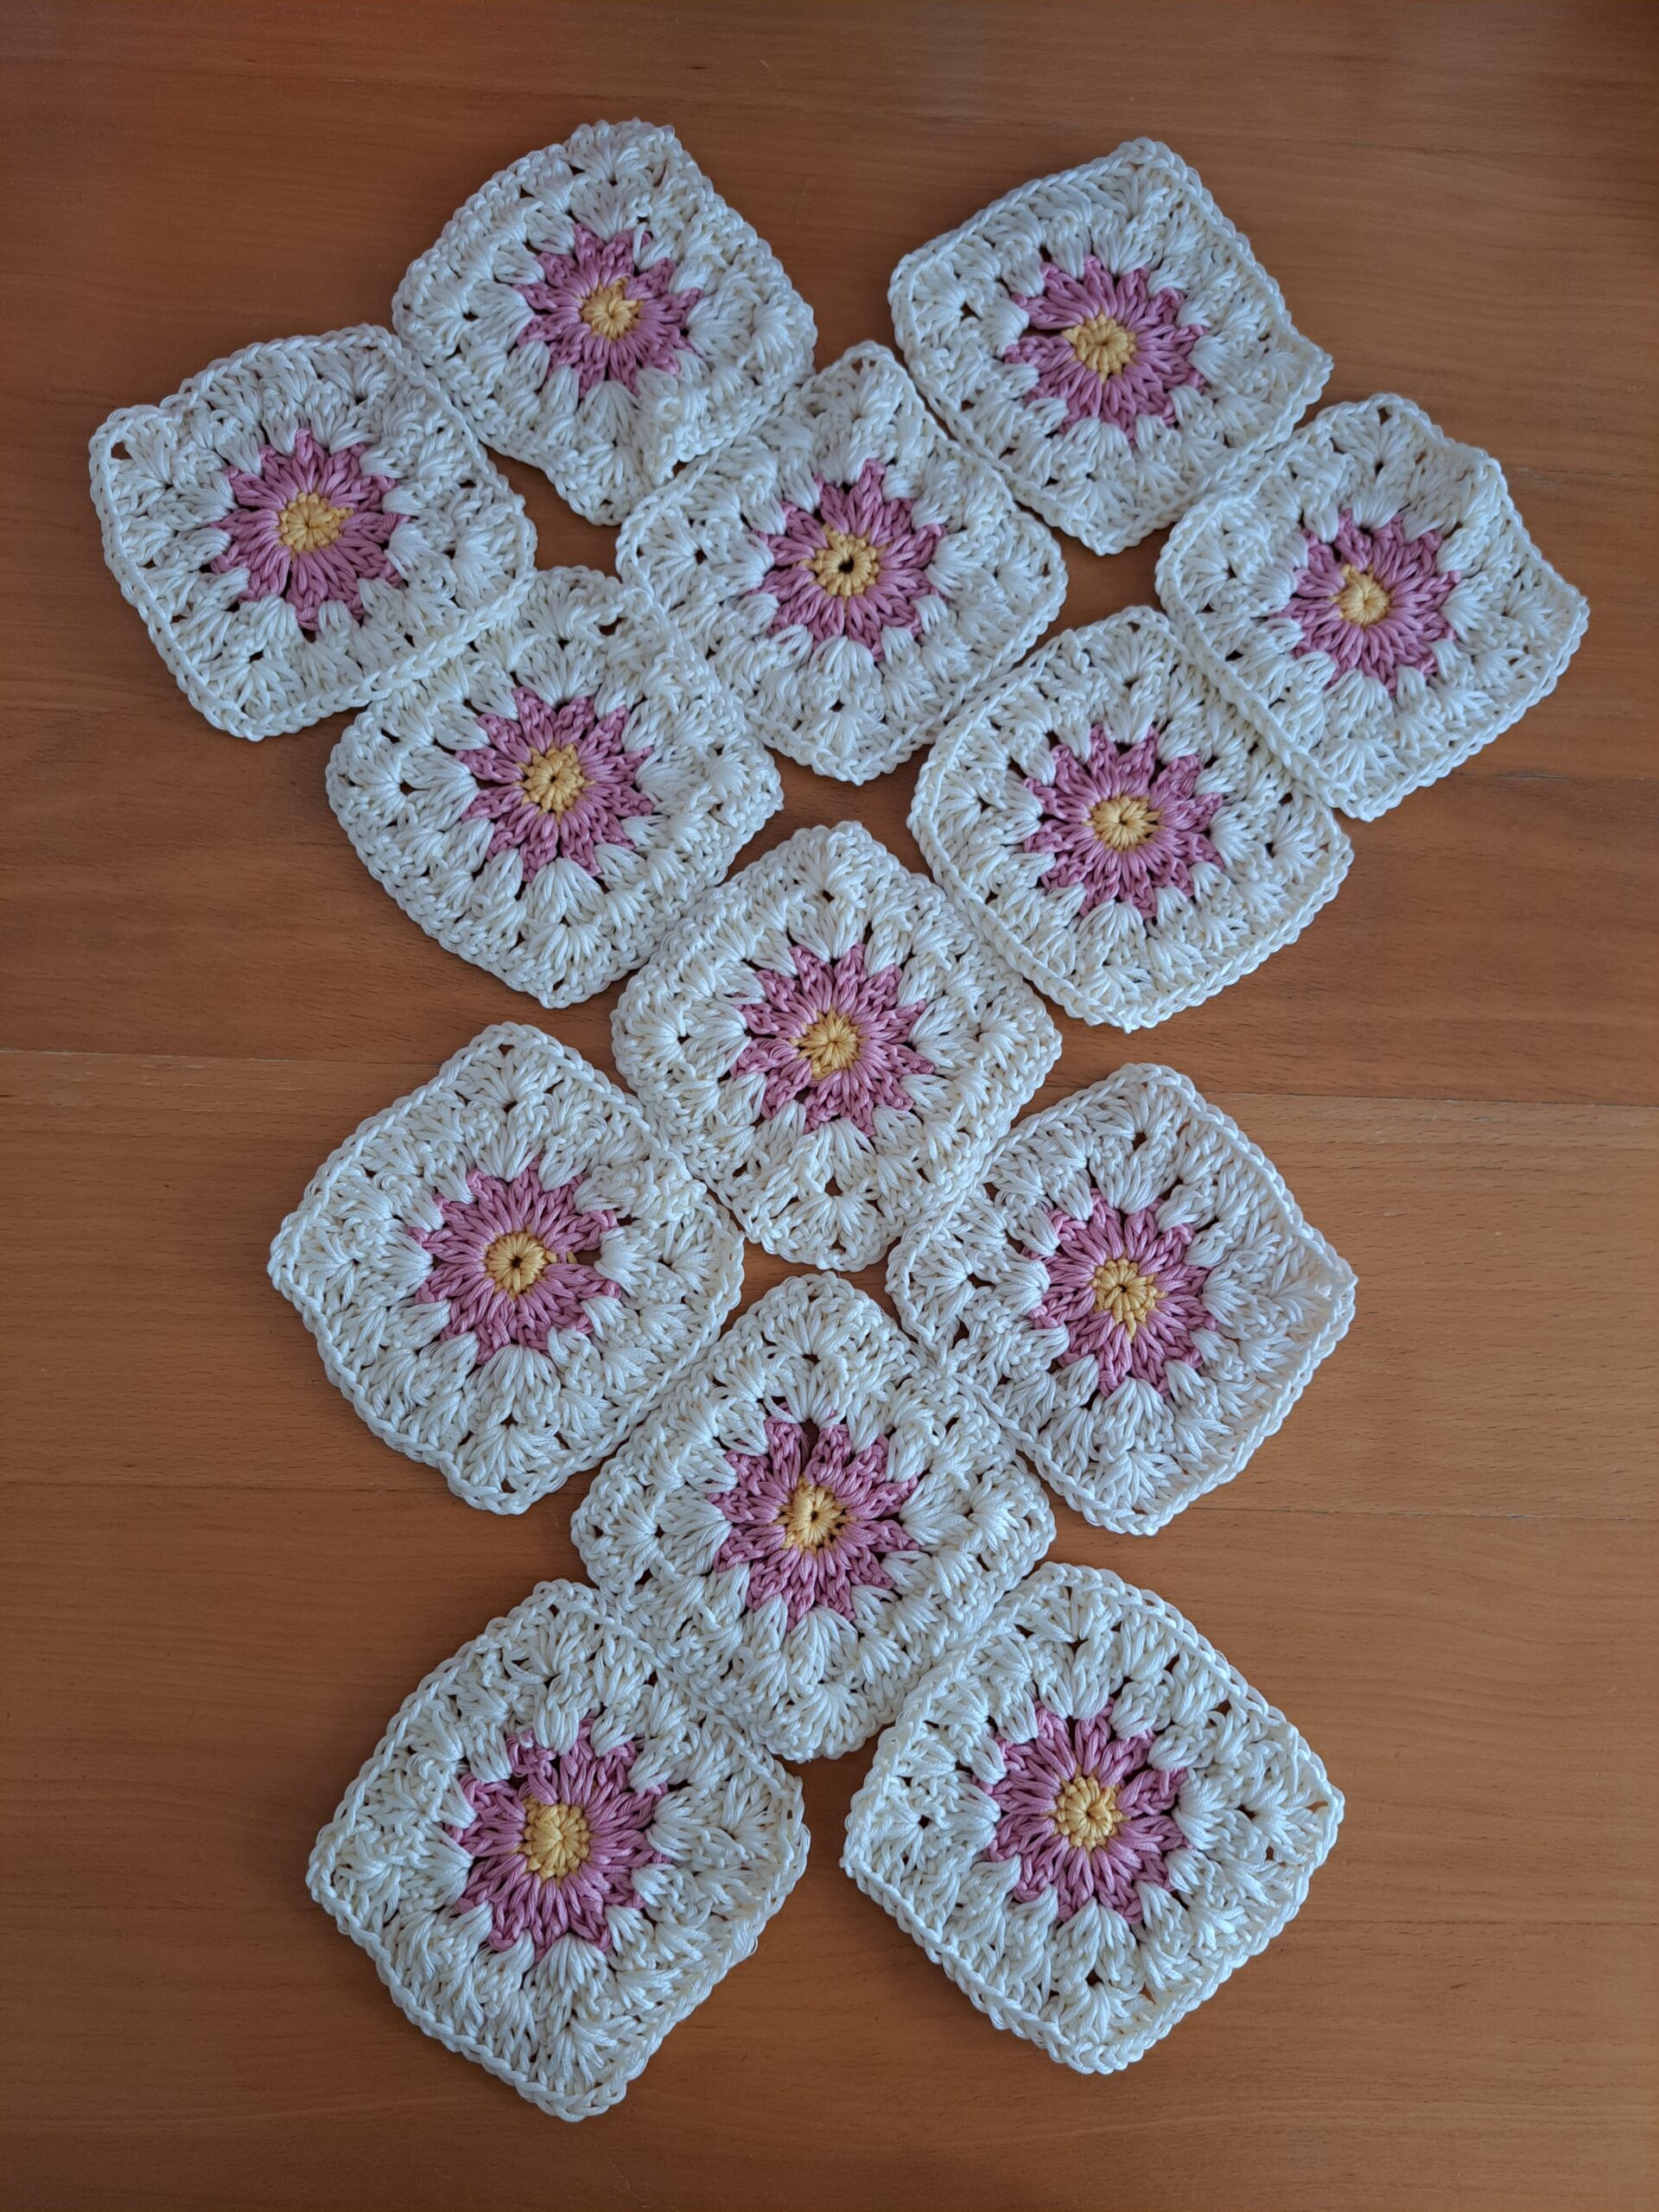 Place your flower squares like so